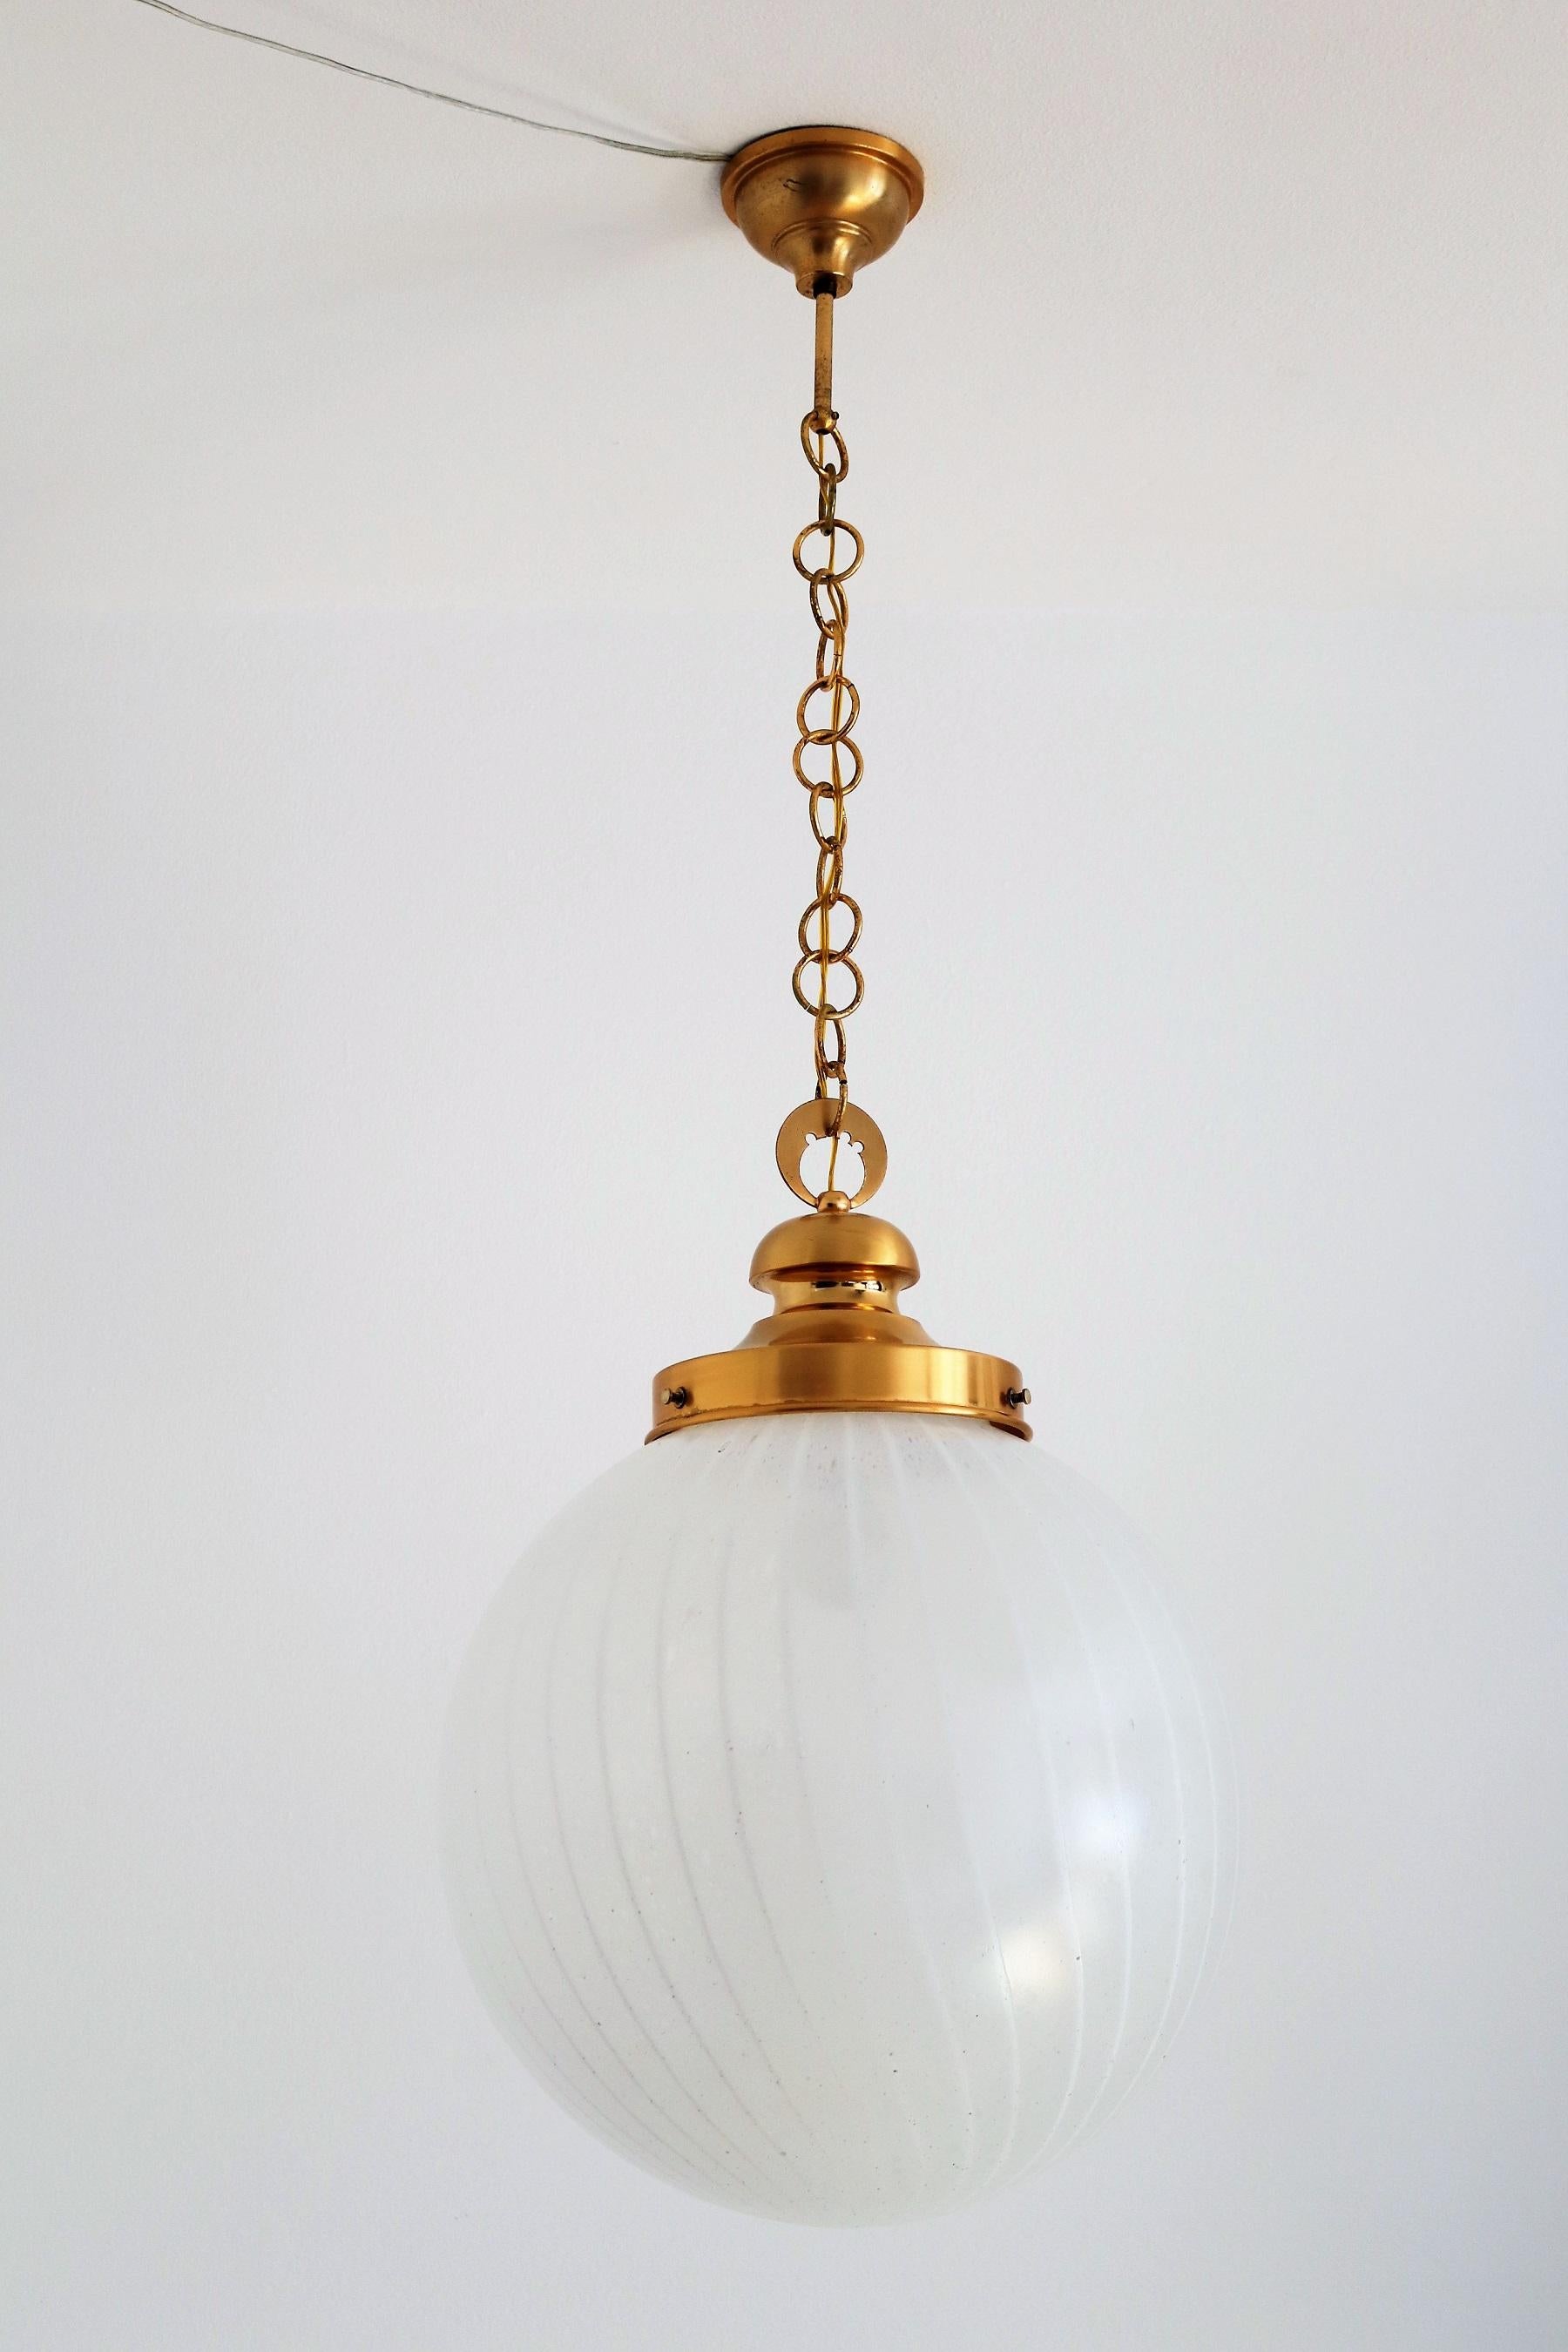 Beautiful and big elegant Murano glass globe pendant lamp with strong brass, golden metal details. Made in Italy by Lampter in the 1960s.
The Murano glass in snow - white color with white thin swirl has countless small bubbles and dark dots within